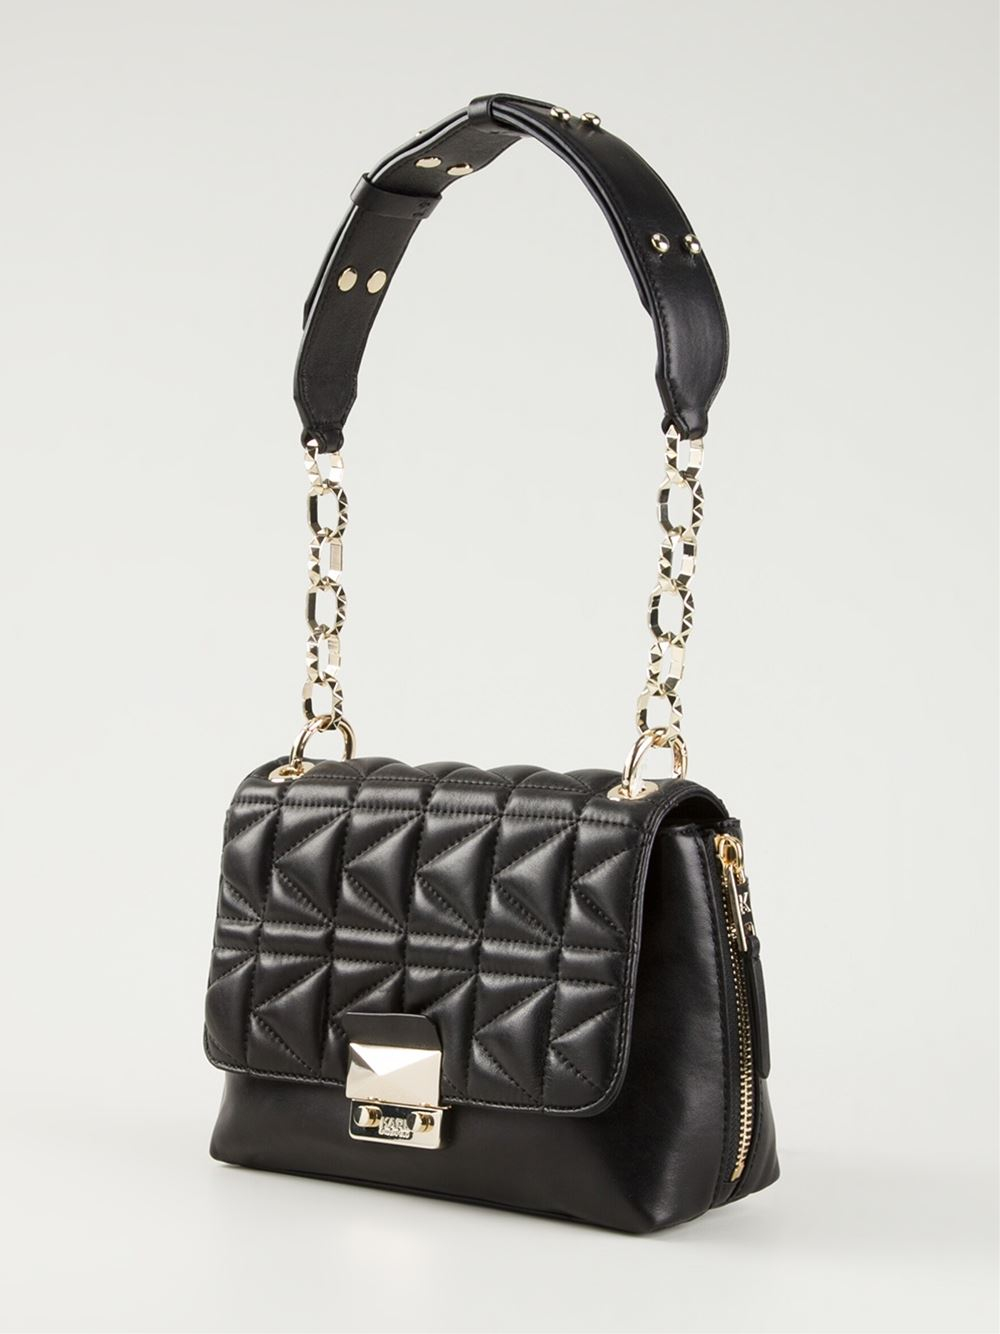 Karl lagerfeld Small Quilted Shoulder Bag in Black | Lyst